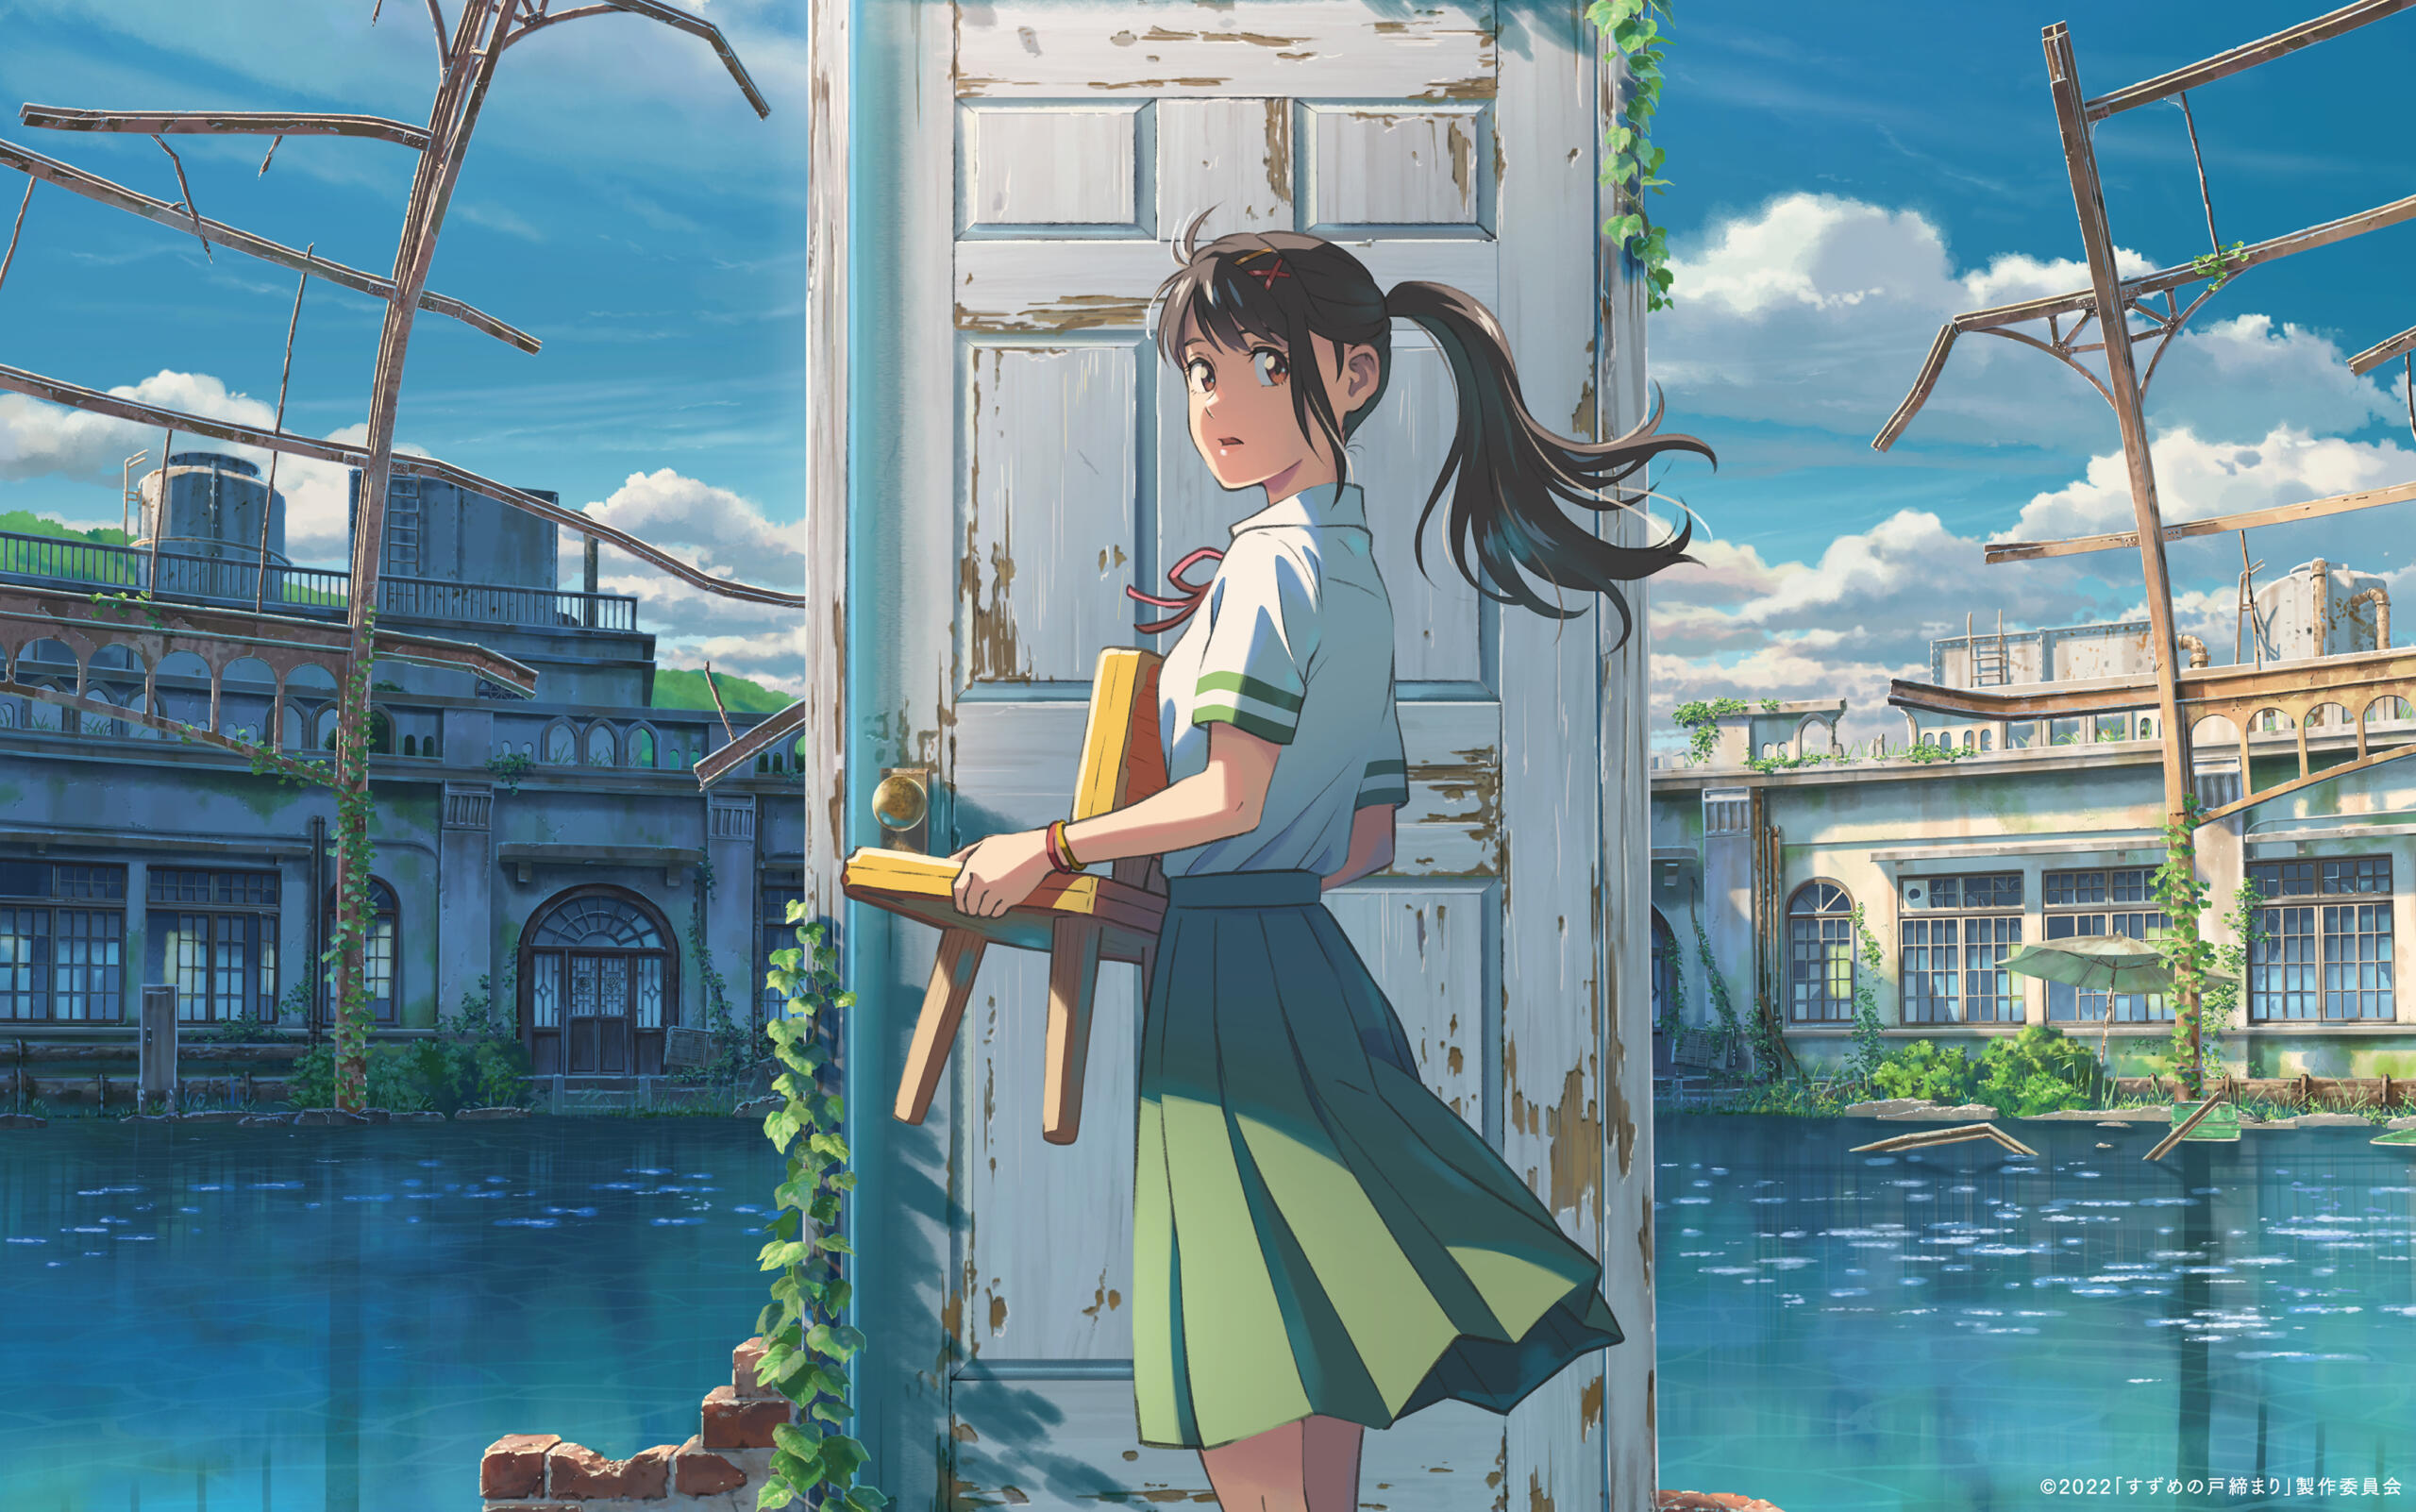 An anime-style drawing shows a girl with a stool in her hand standing in front of a door framed in a perforated house wall.